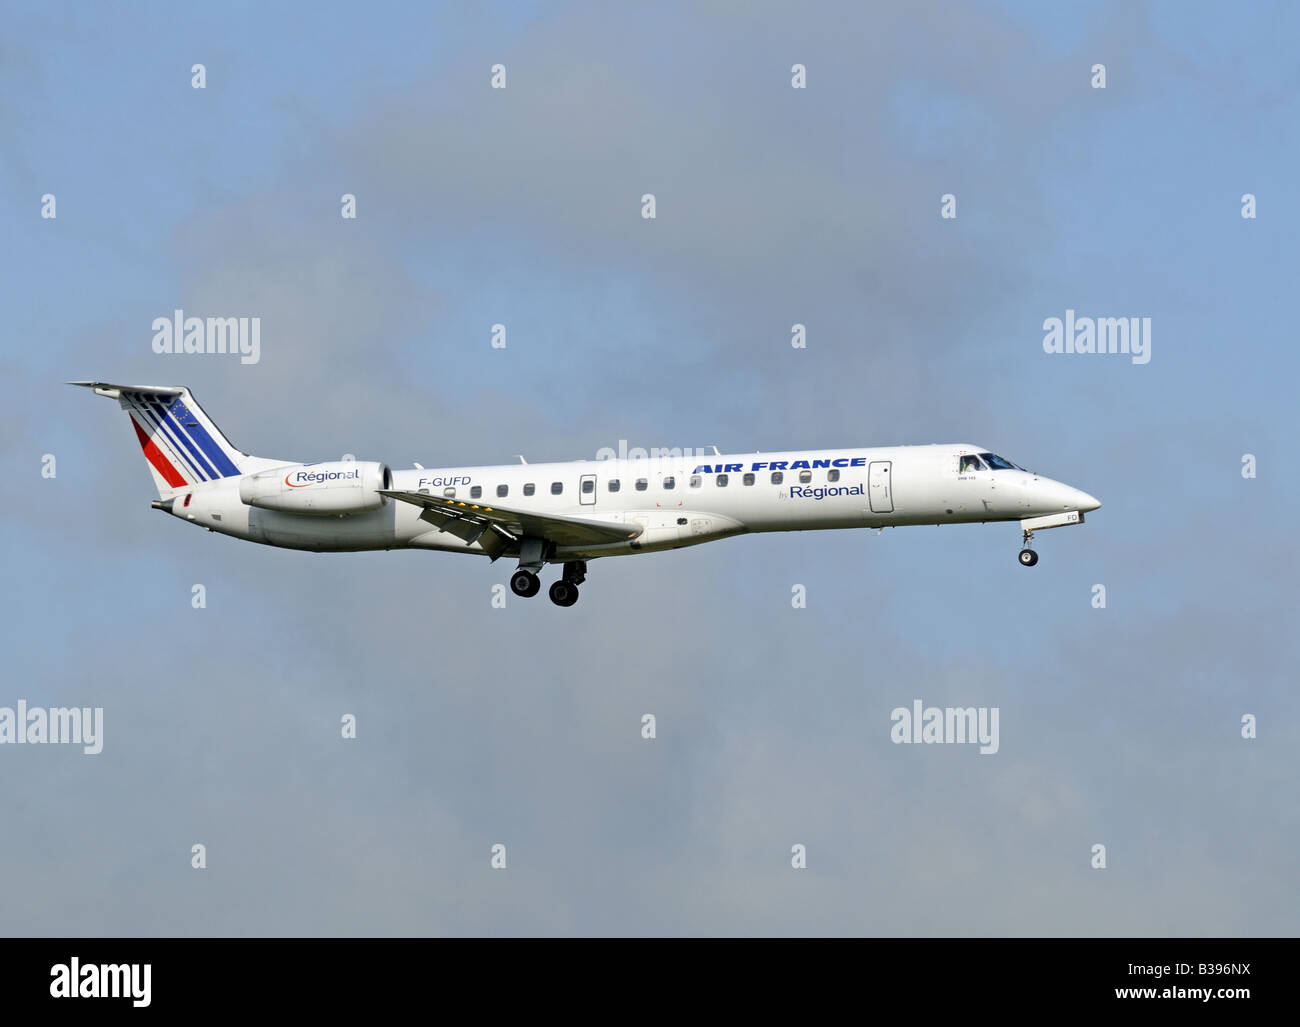 An Embraer RJ145EU of Regional Airlines France on final approach to Aberdeen Dyce Airfield Grampian Region North East Scotland Stock Photo